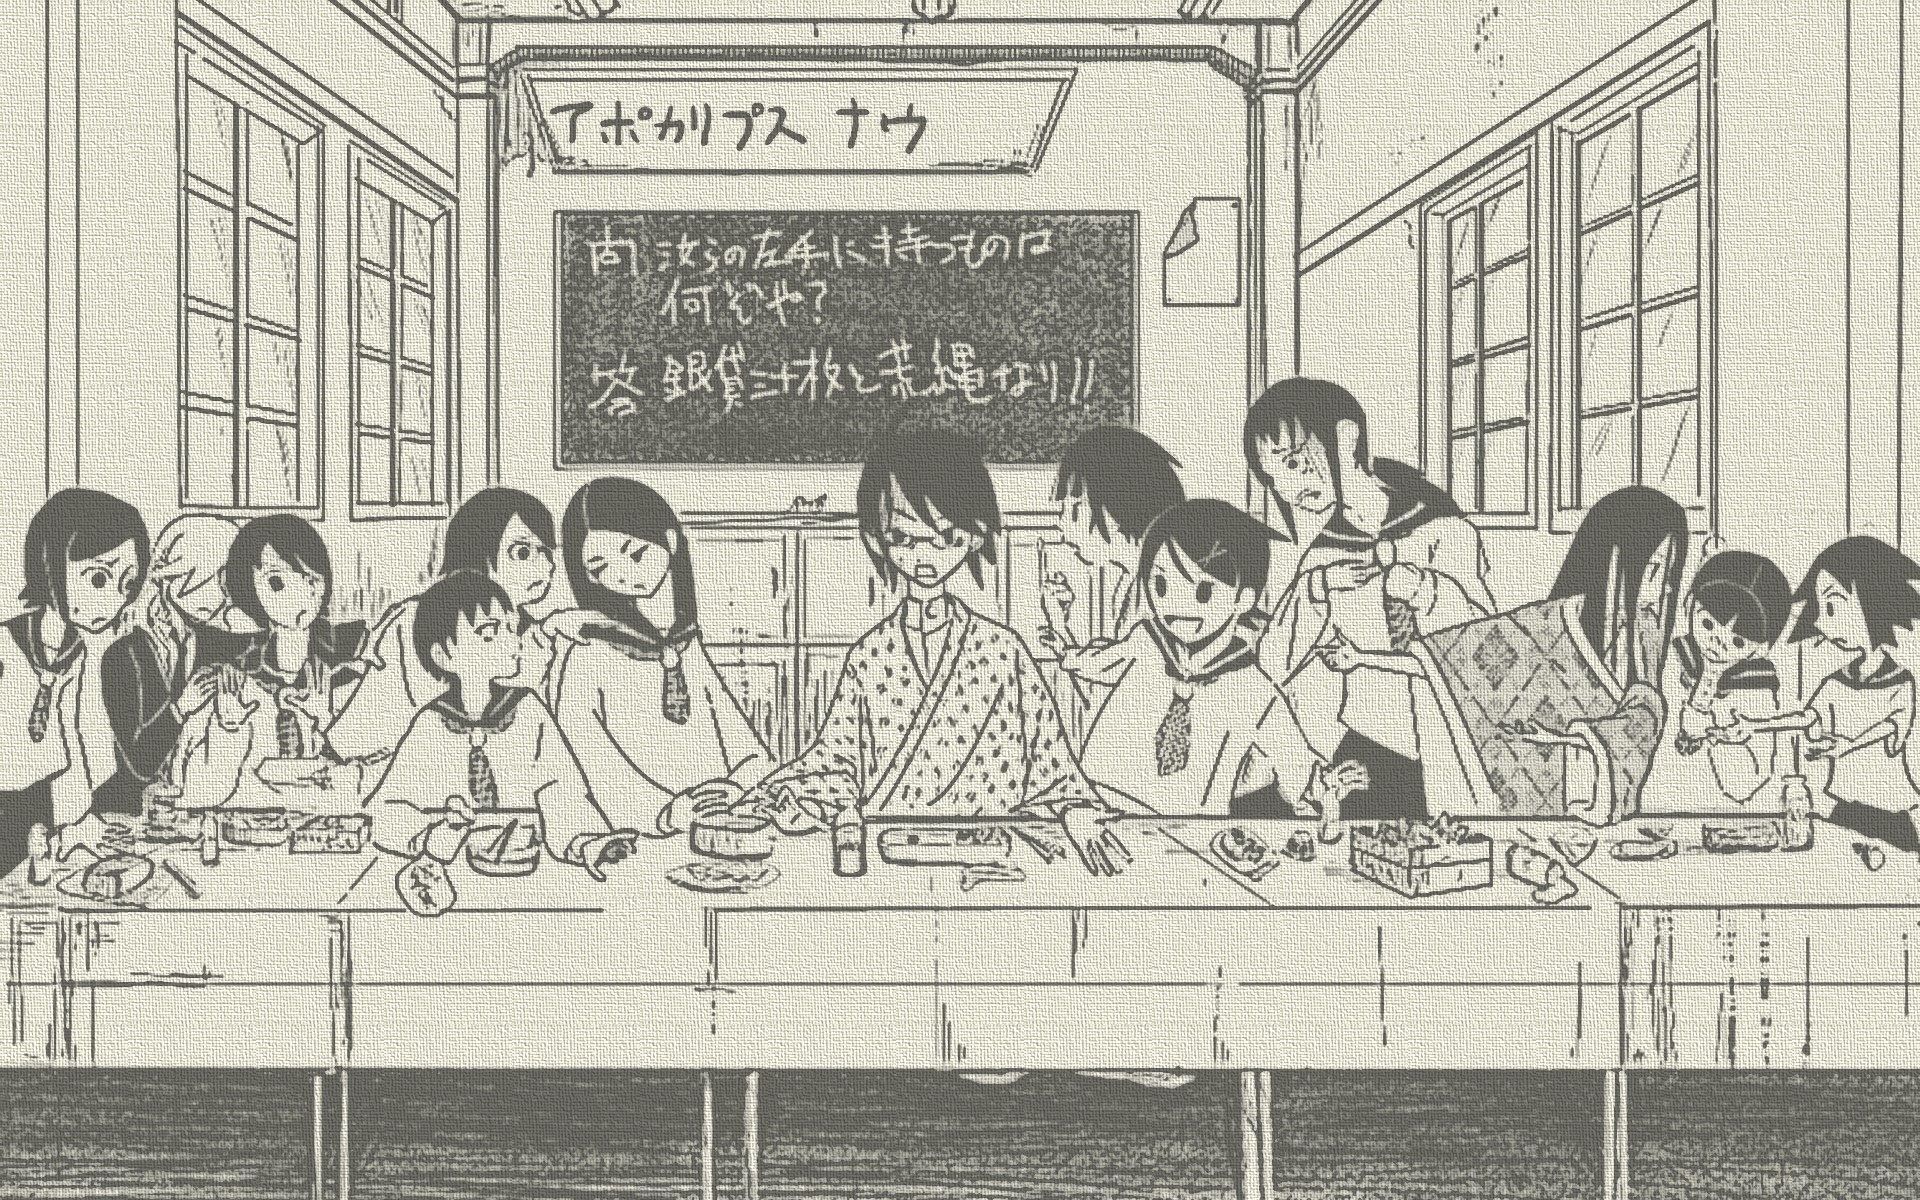 Anime characters gather around a table reminiscent of The Last Supper painting. So long, Zetsubou-Sensei.